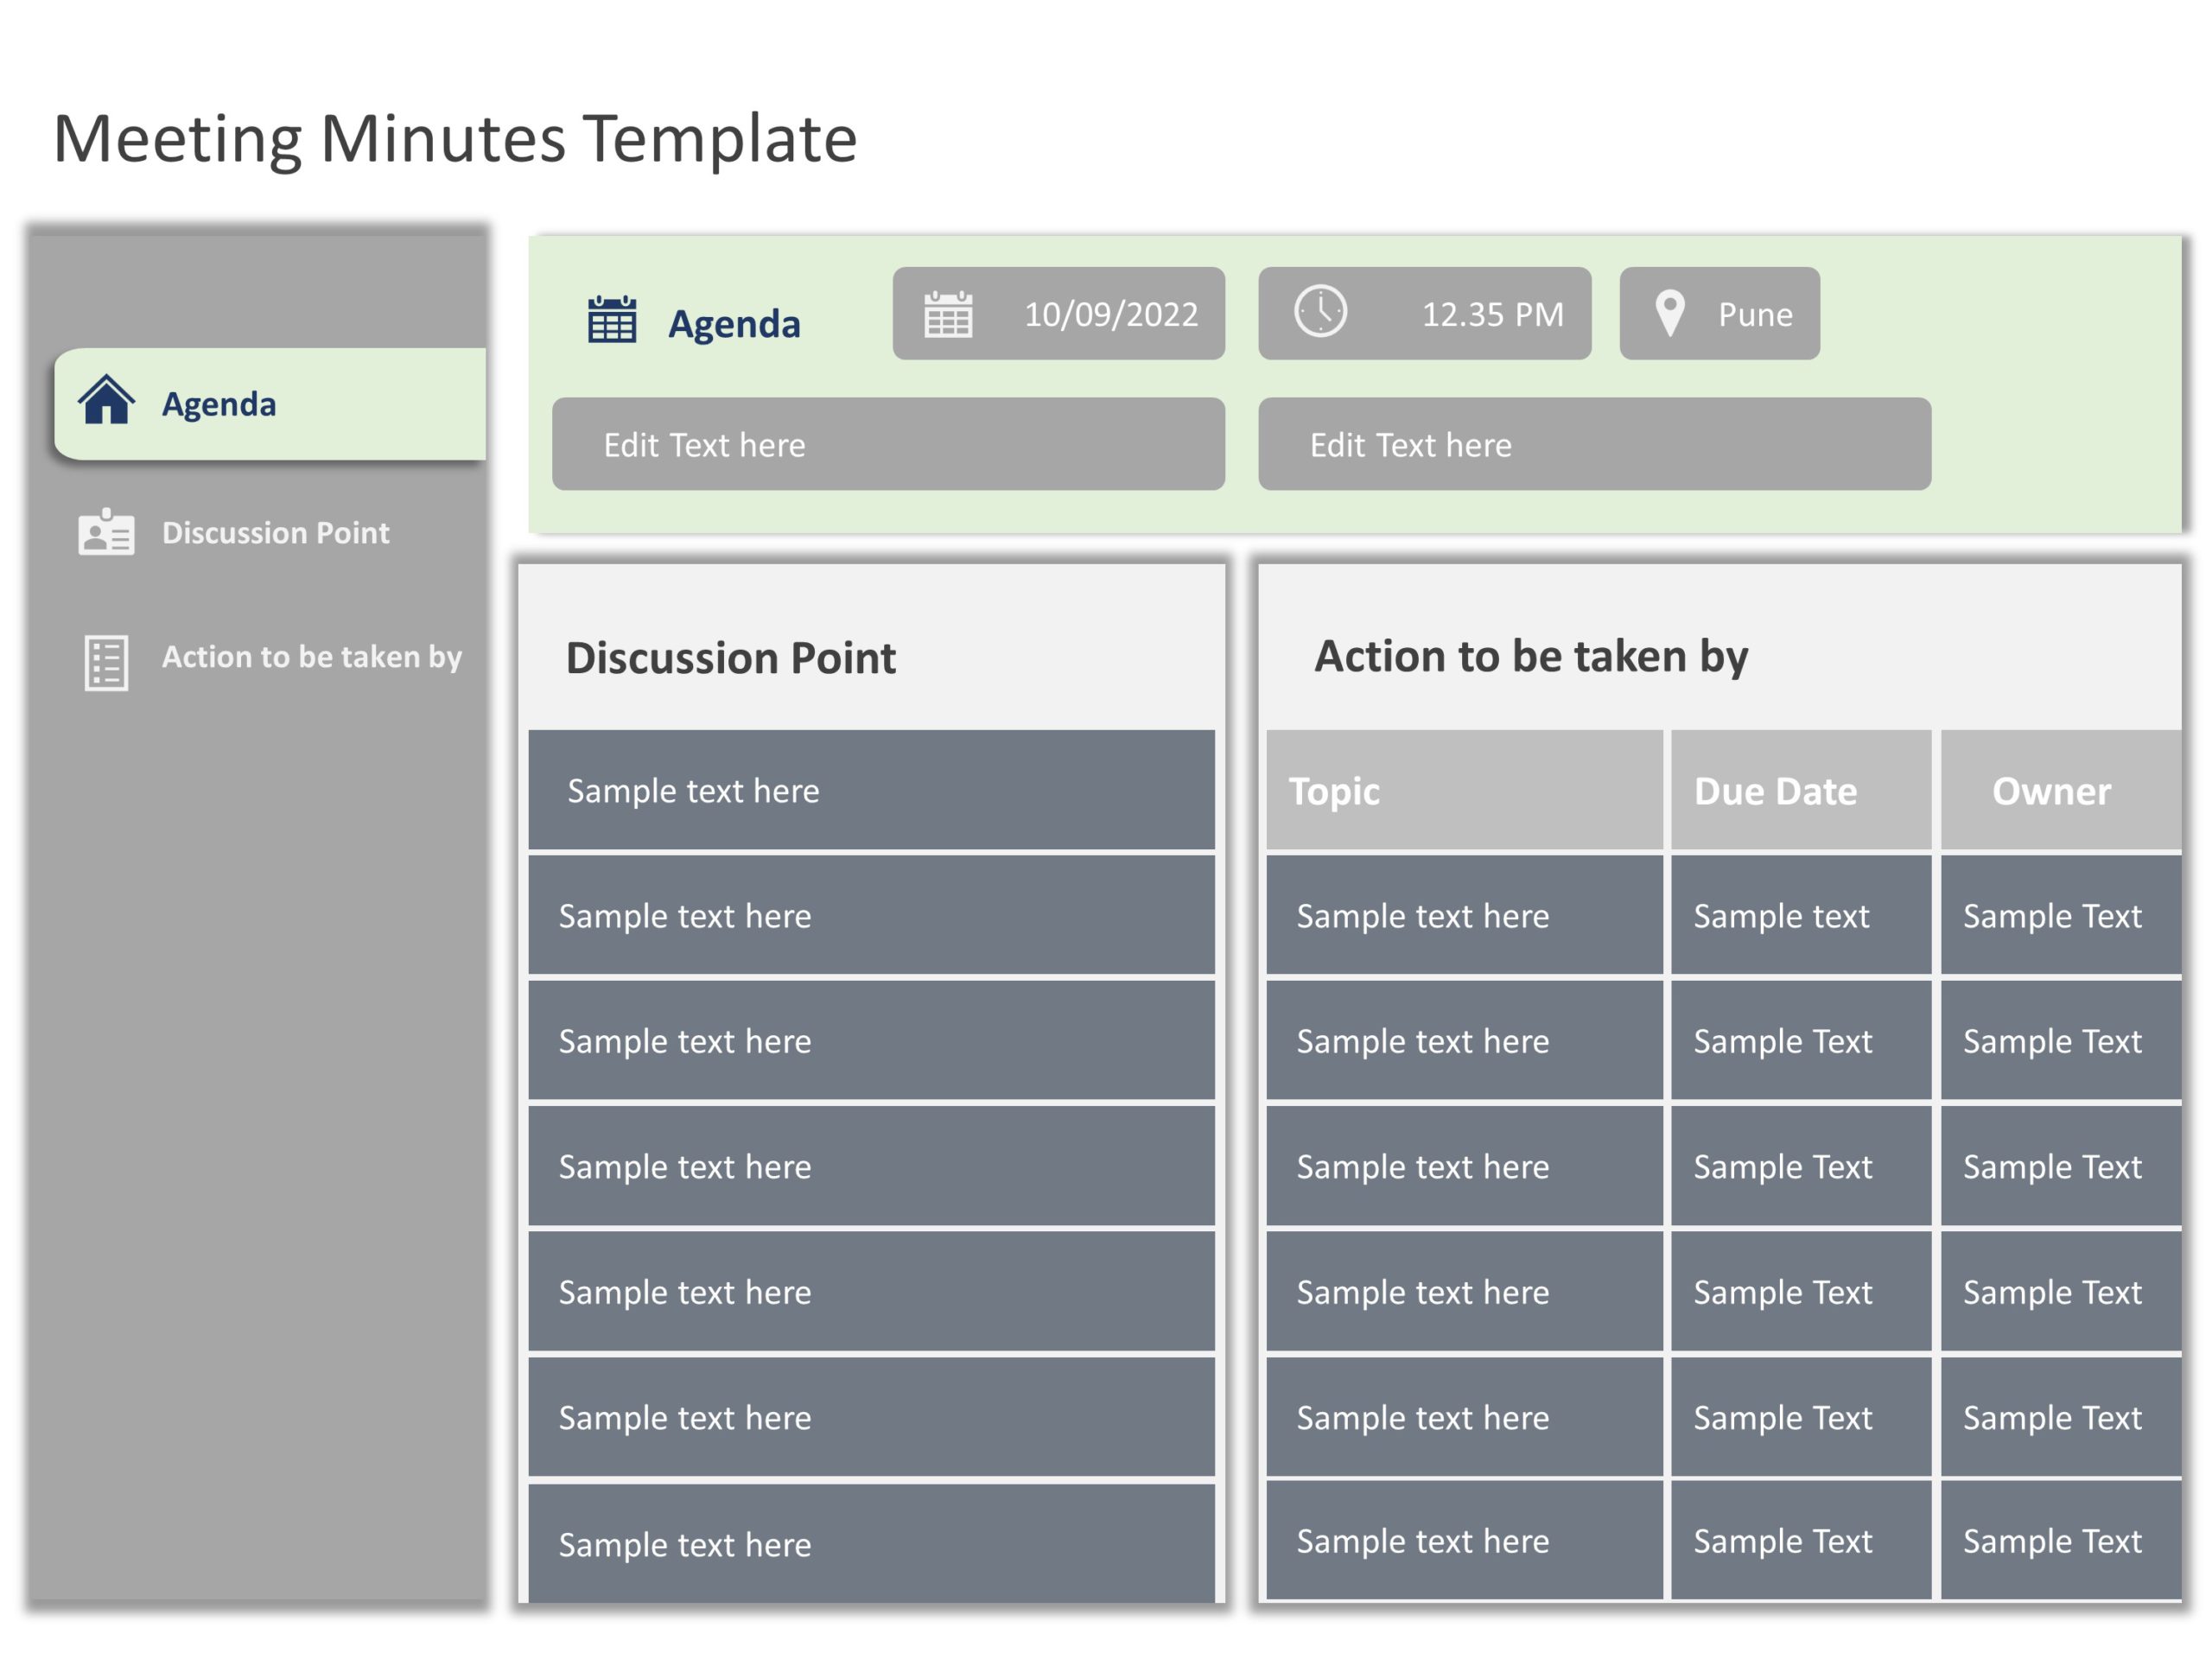 Minutes of Meeting PowerPoint Template